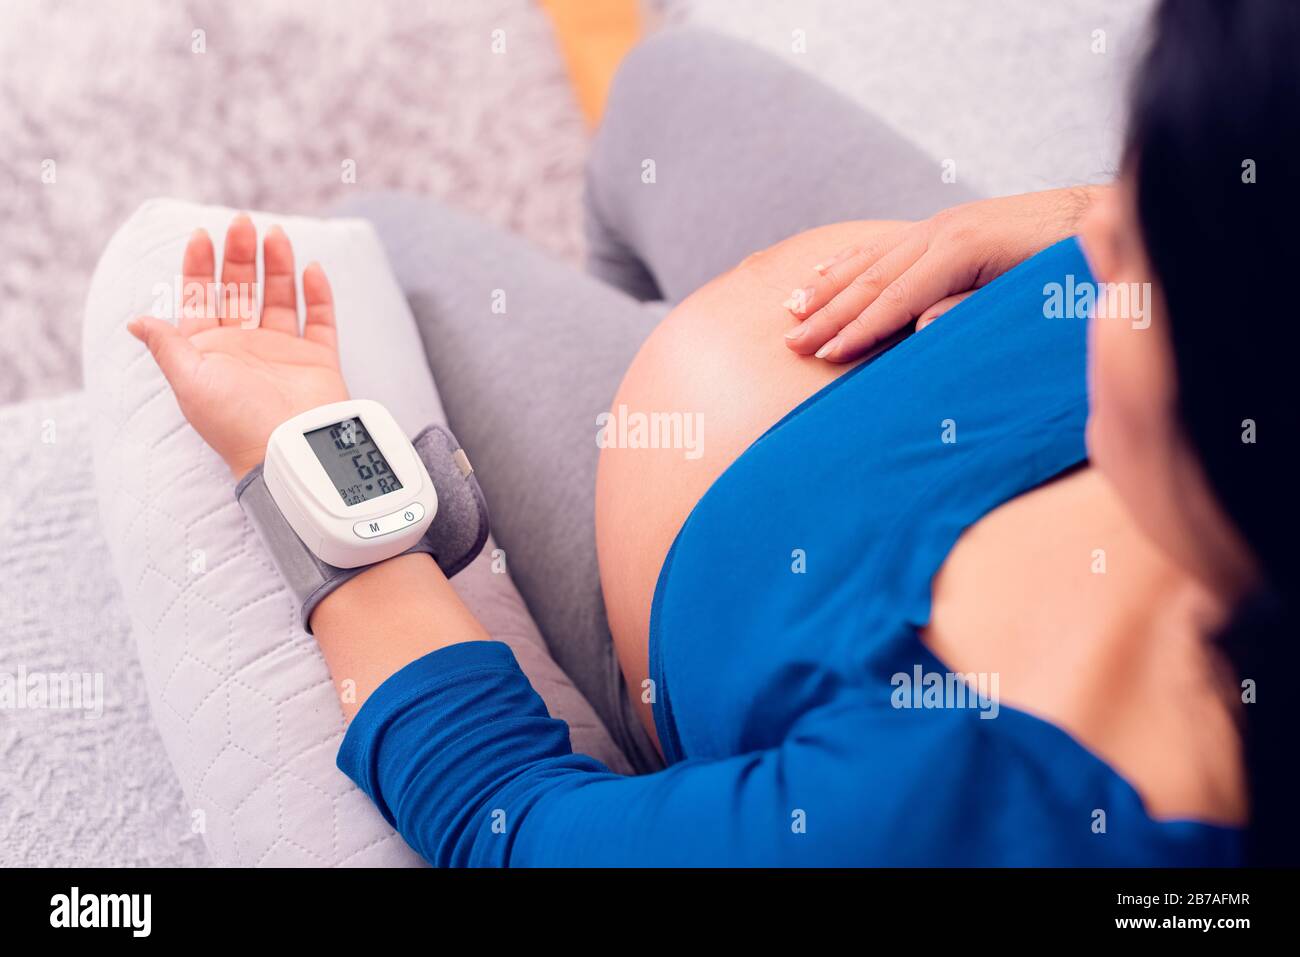 Pregnant woman monitoring her blood pressure at home with the medical device on her wrist and exposing her belly. Stock Photo